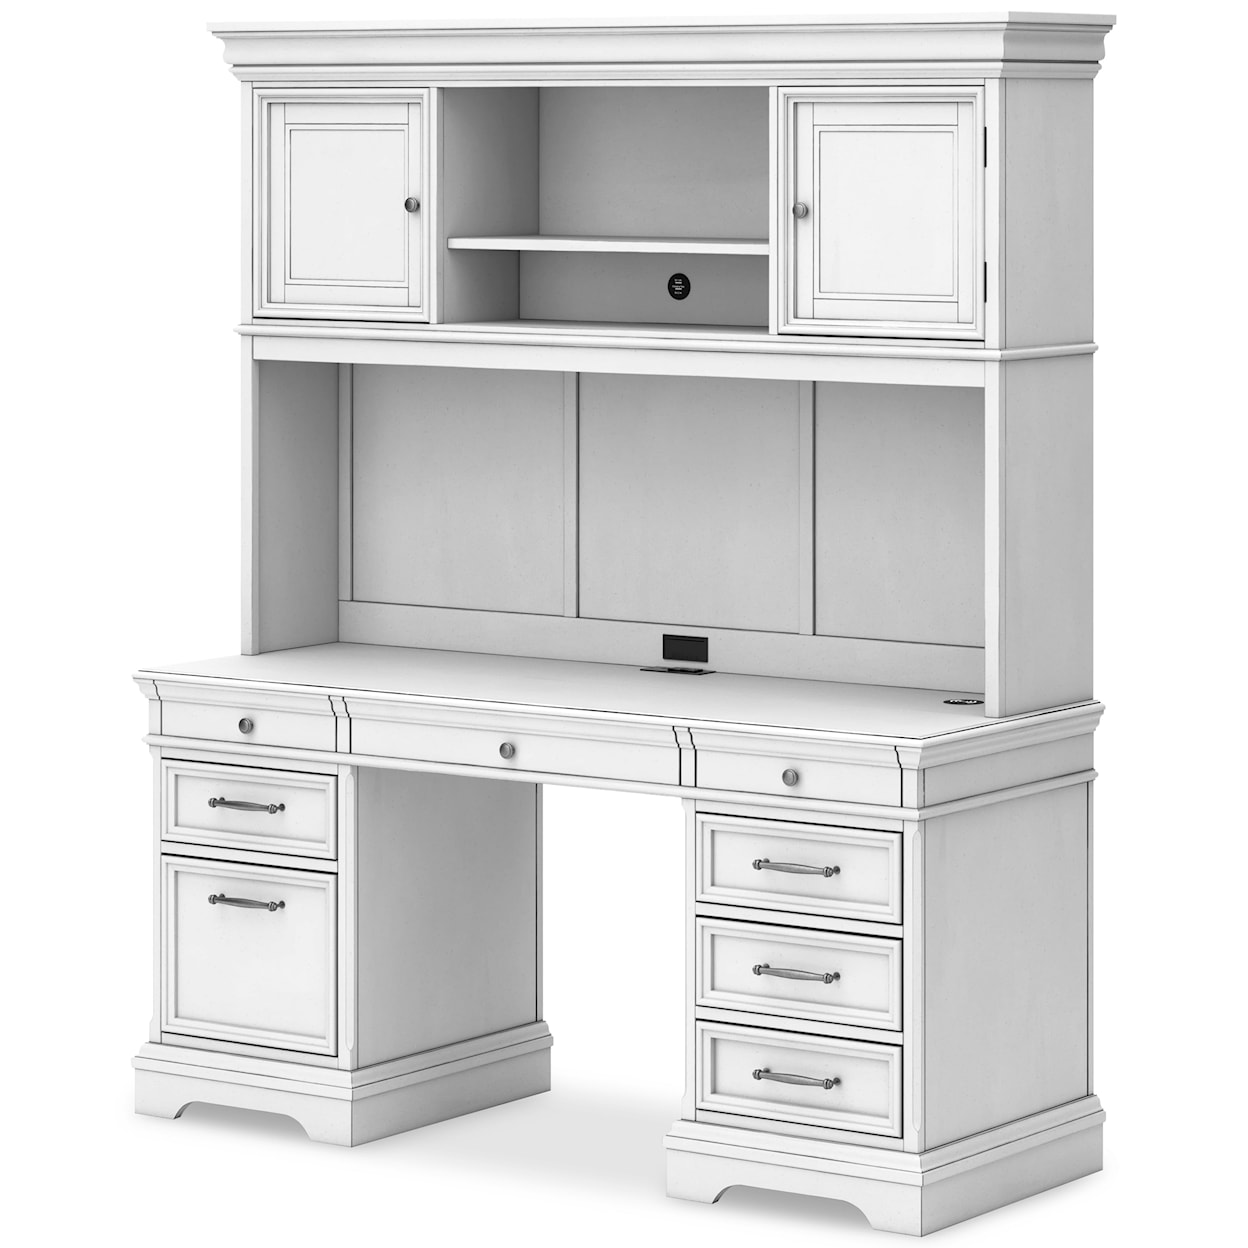 Signature Design by Ashley Kanwyn Home Office Storage Leg Desk with Cord  Management and USB Charging, Furniture Superstore - Rochester, MN